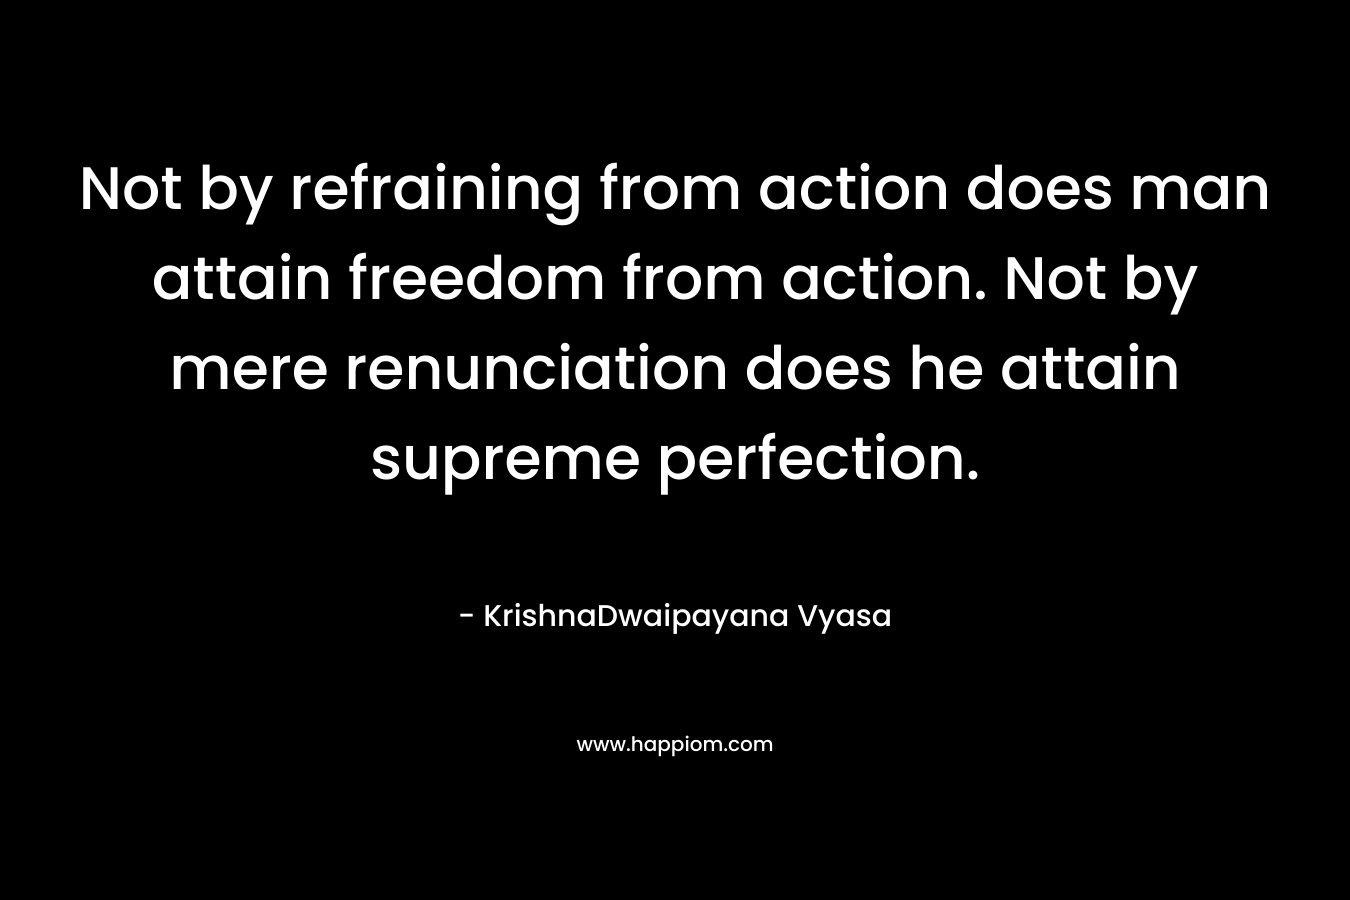 Not by refraining from action does man attain freedom from action. Not by mere renunciation does he attain supreme perfection.